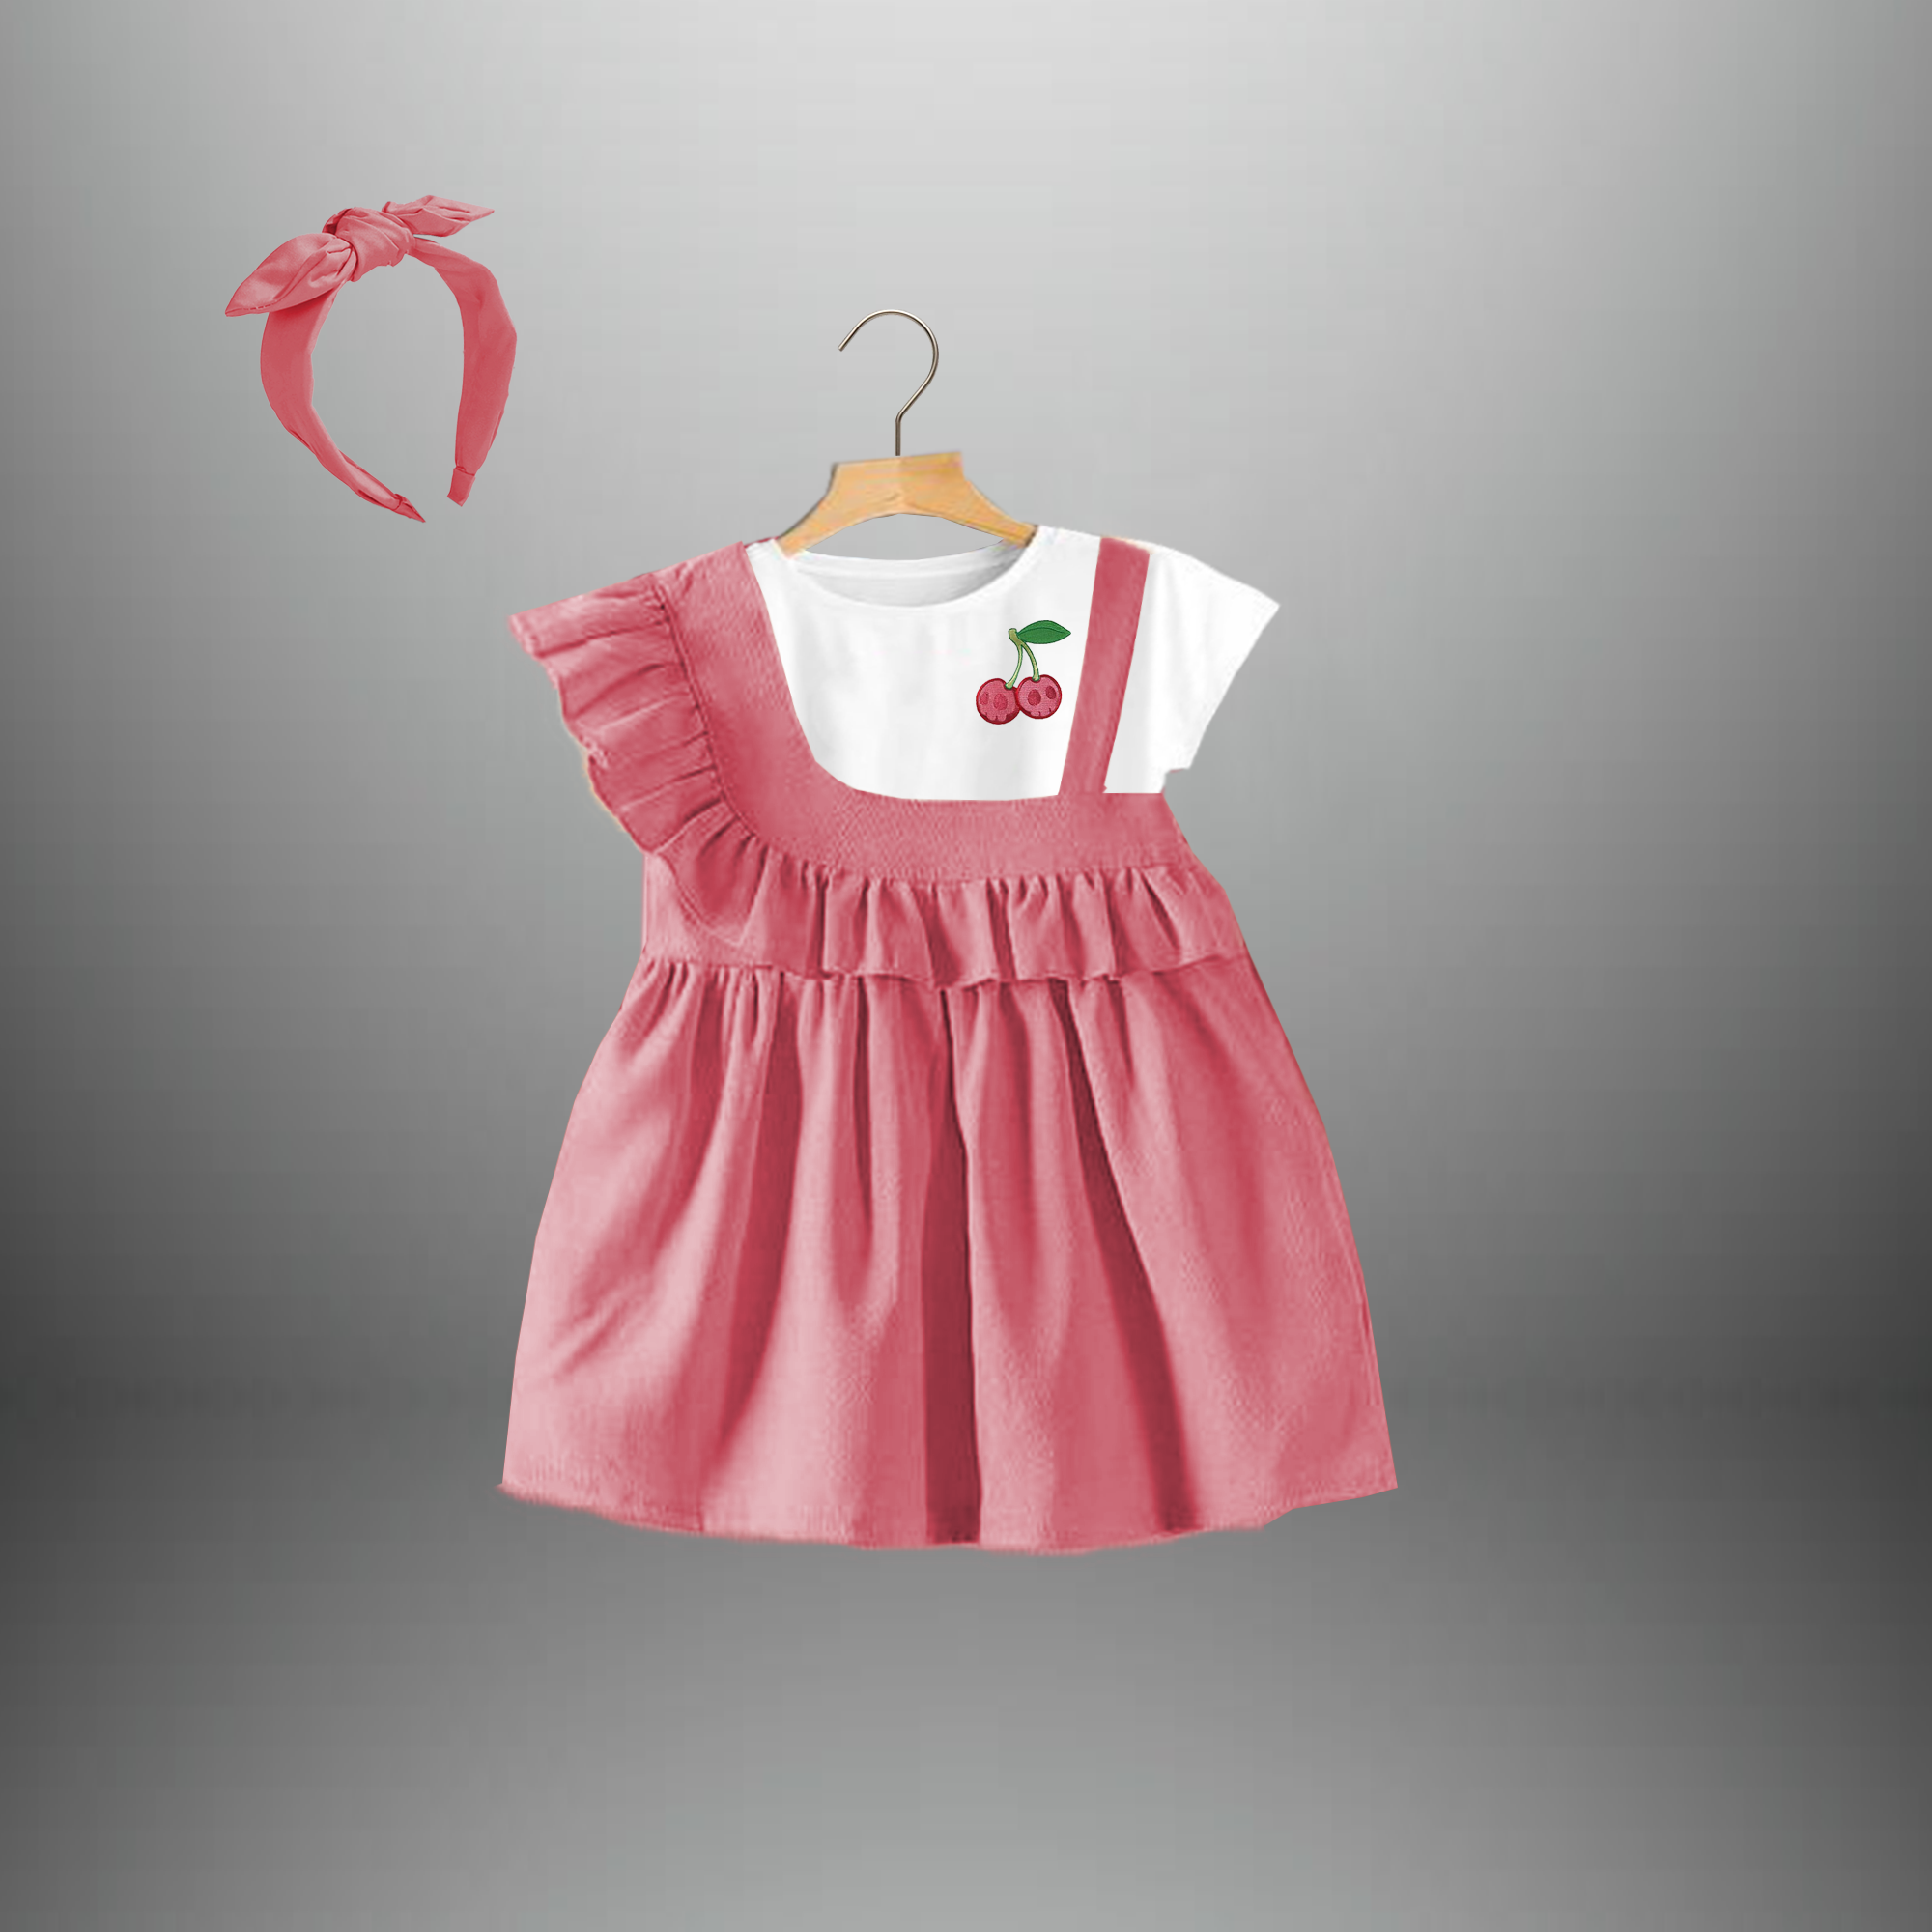 Toddler's Color blocked dress with frills and a free hairband-RKFCTT075